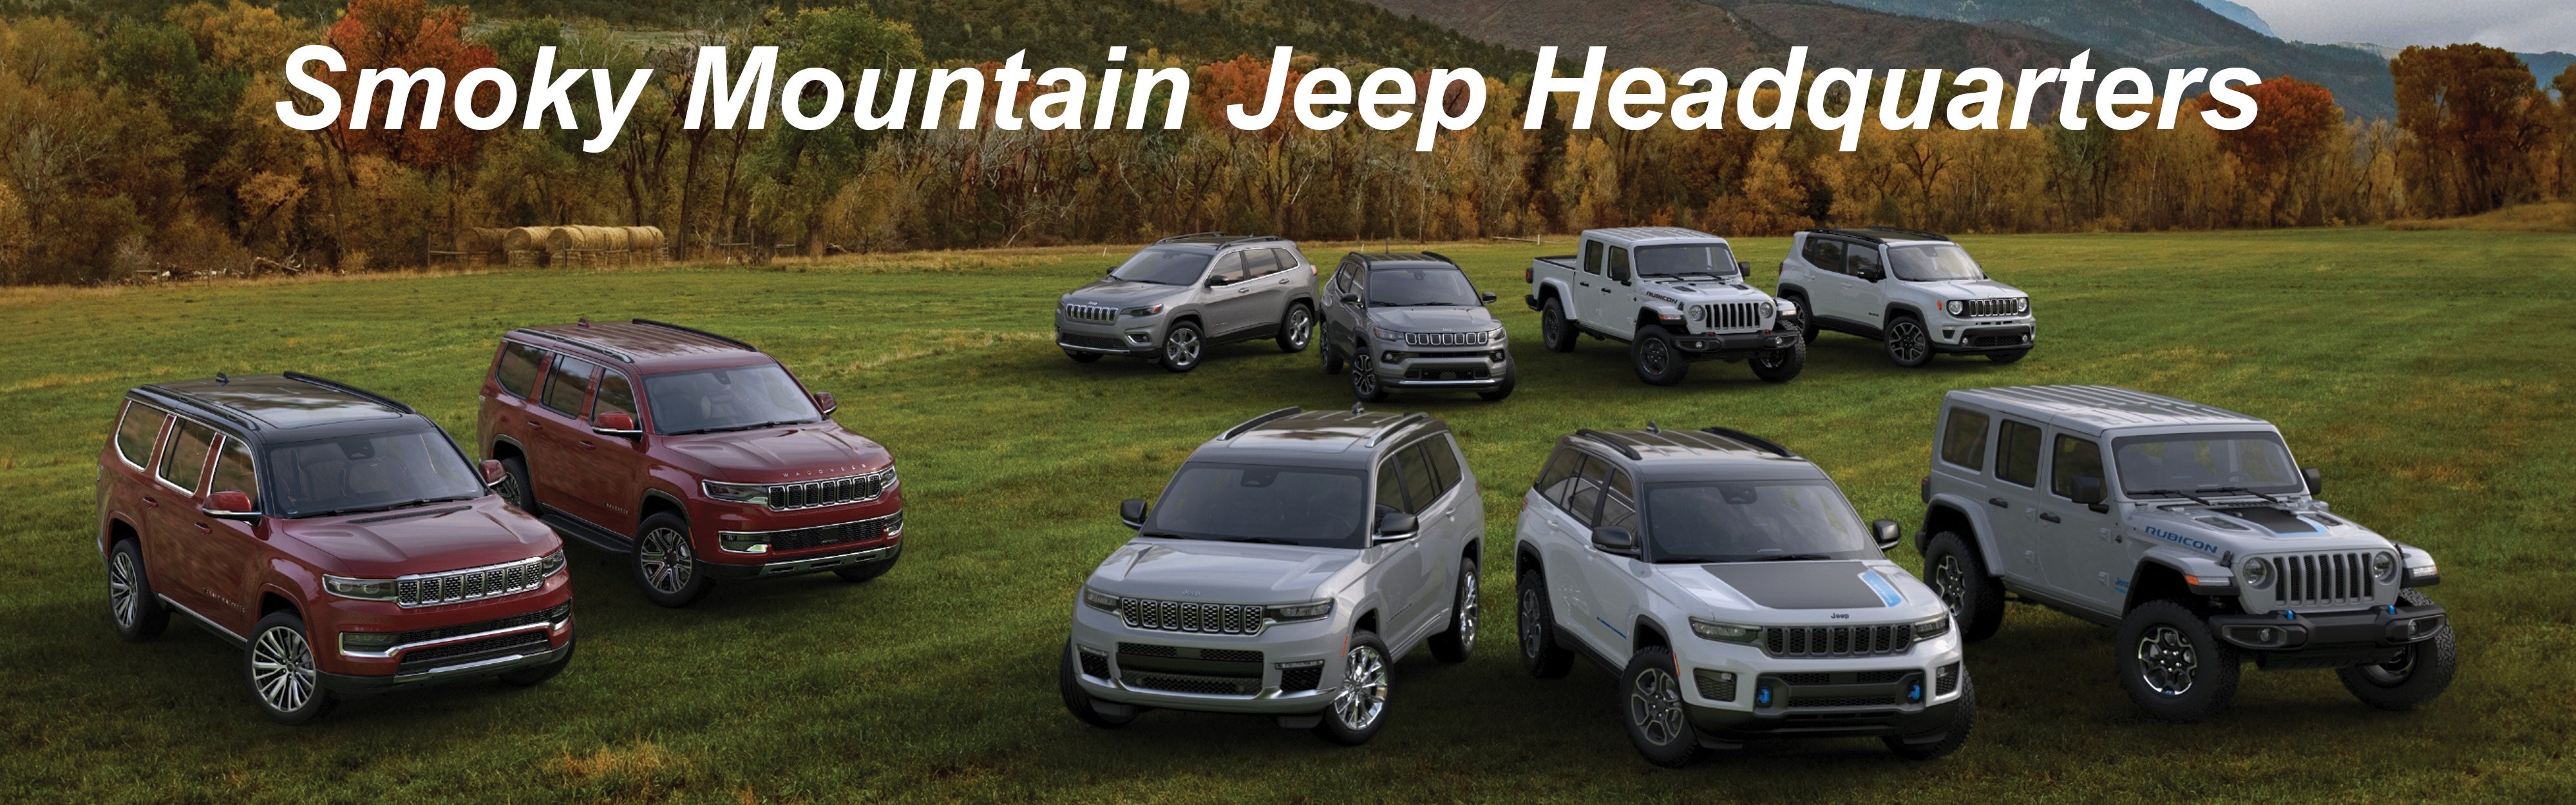 Your Smoky Mountain Jeep HQ!